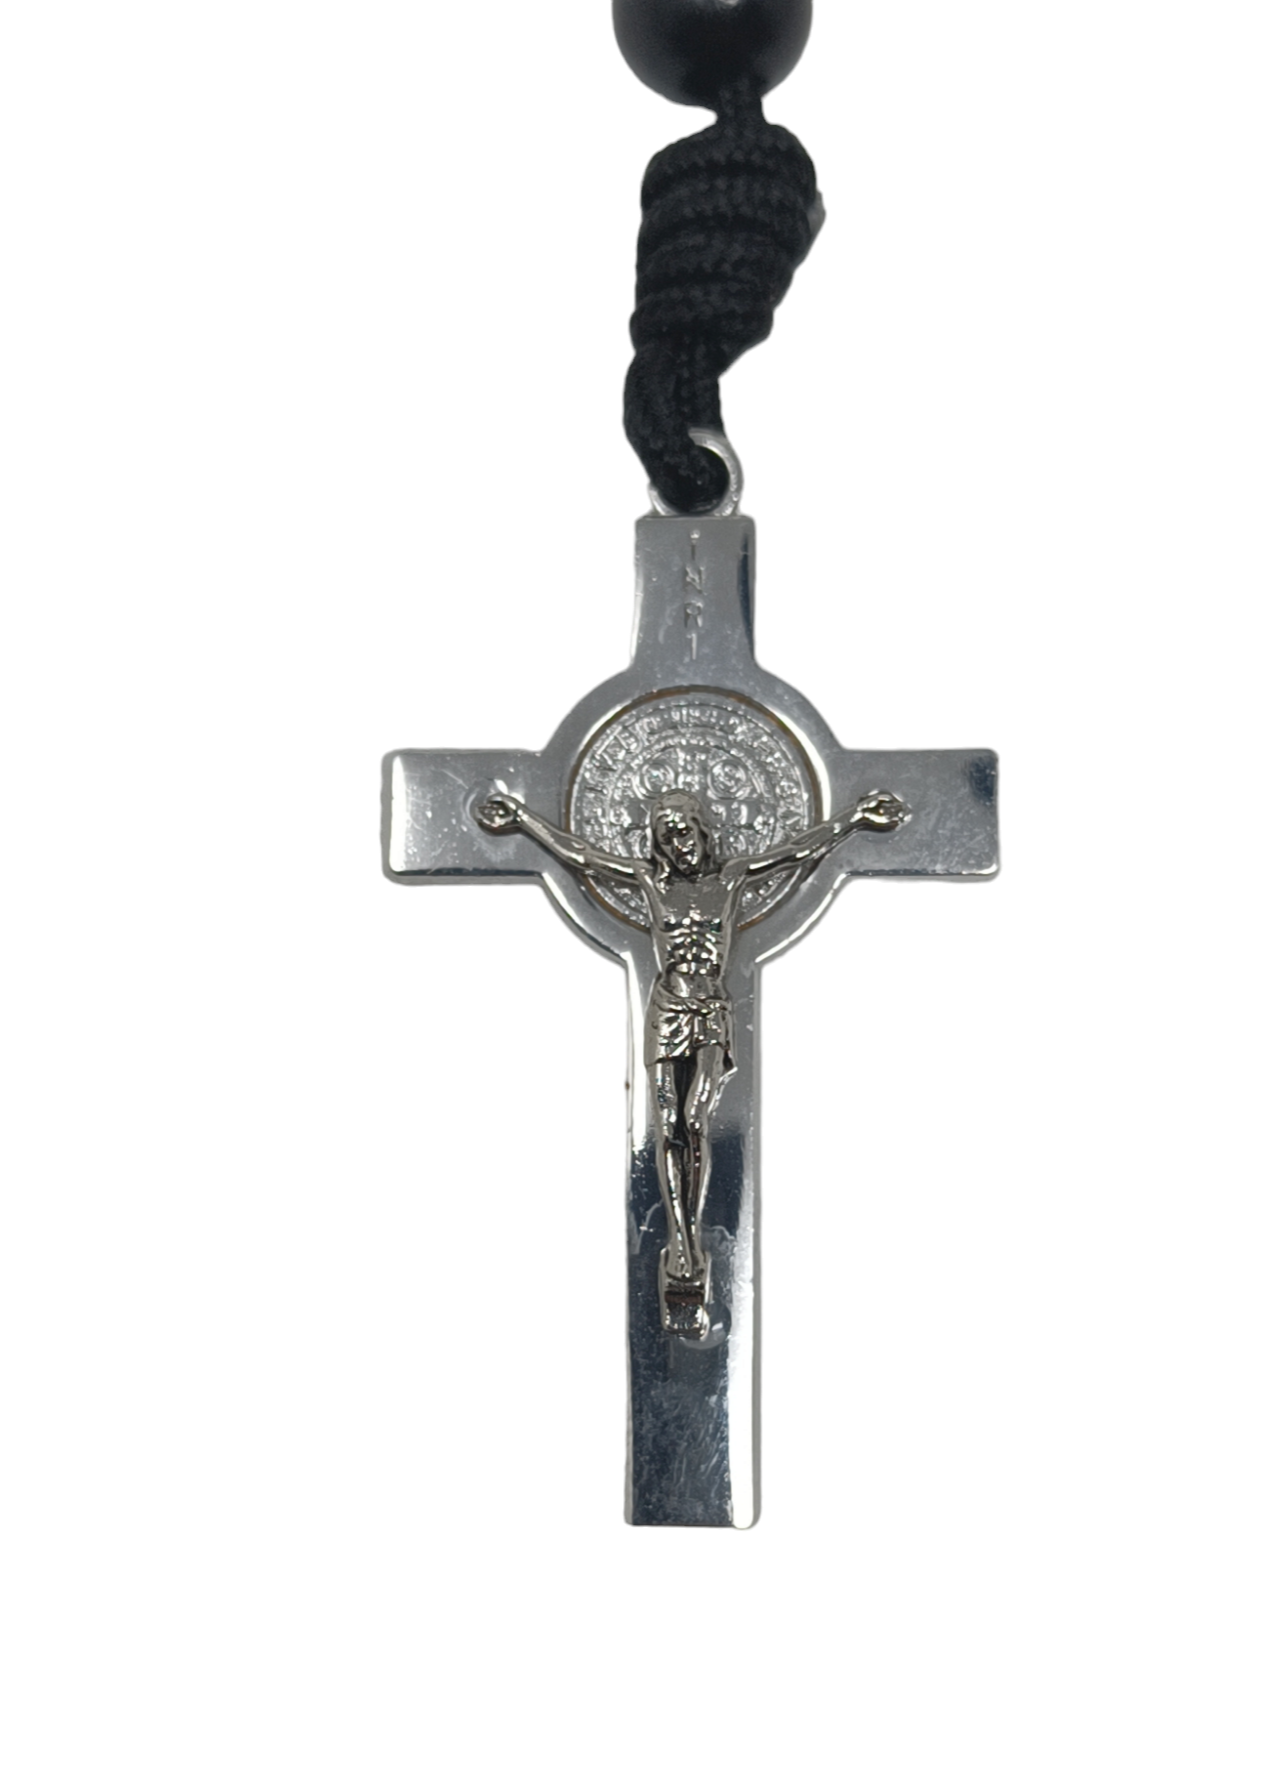 Paracord Black Rosary keyring, Silver St Benedict crucifix, One decade metal & knot Rosary, Strong, Catholic Rosary, Pilgrimages, Knotted Rosary, Unbreakable, Waterproof